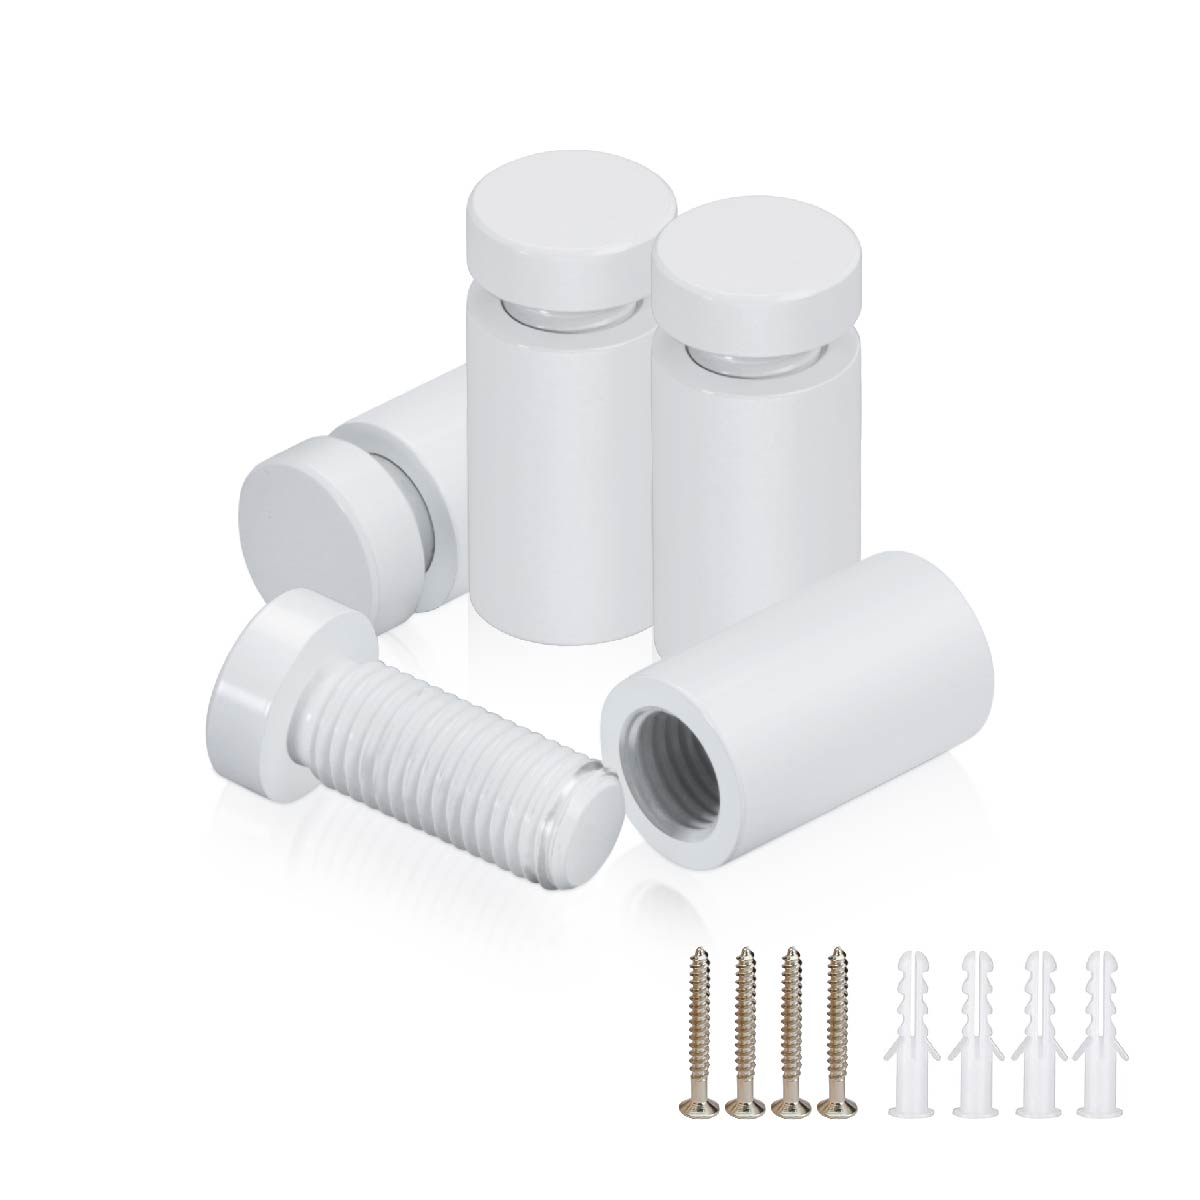 (Set of 4) 1/2'' Diameter X 3/4'' Barrel Length, Affordable Aluminum Standoffs, White Coated Finish Standoff and (4) 2208Z Screw and (4) LANC1 Anchor for concrete/drywall (For Inside/Outside) [Required Material Hole Size: 3/8'']